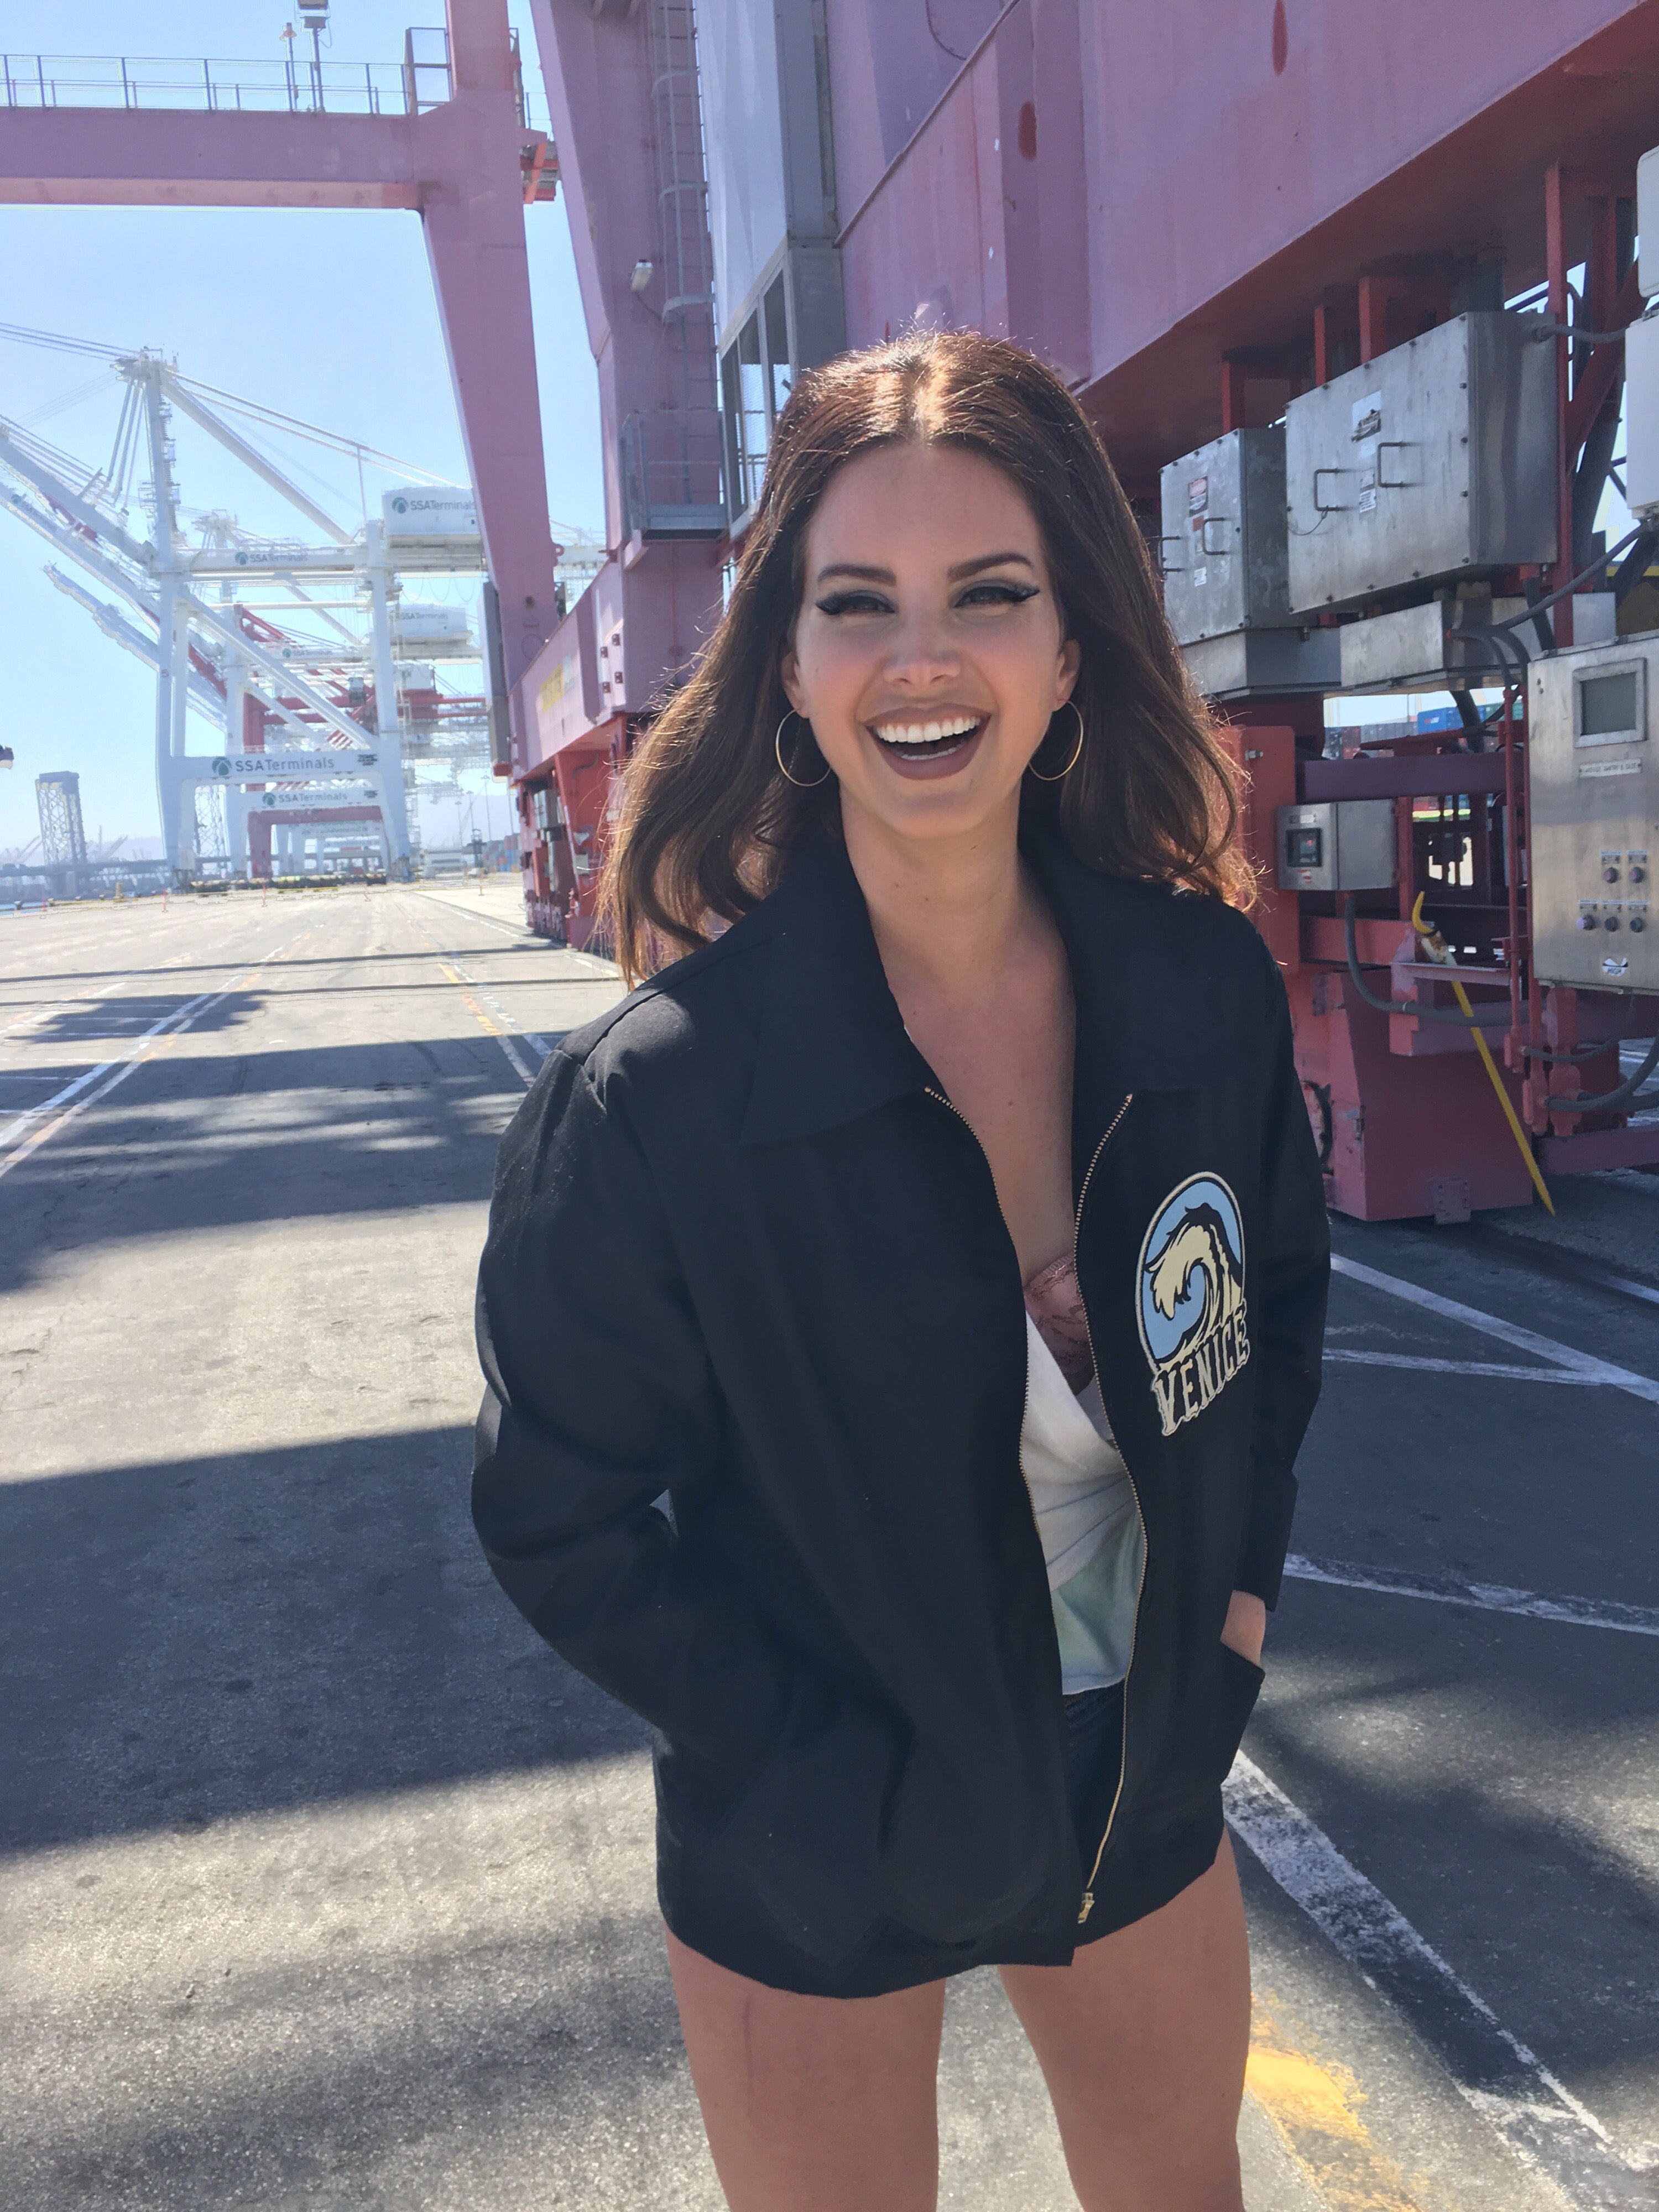 Lana Del Rey - One Special Night, One Special Show - Platinum Tickets presales in Boston